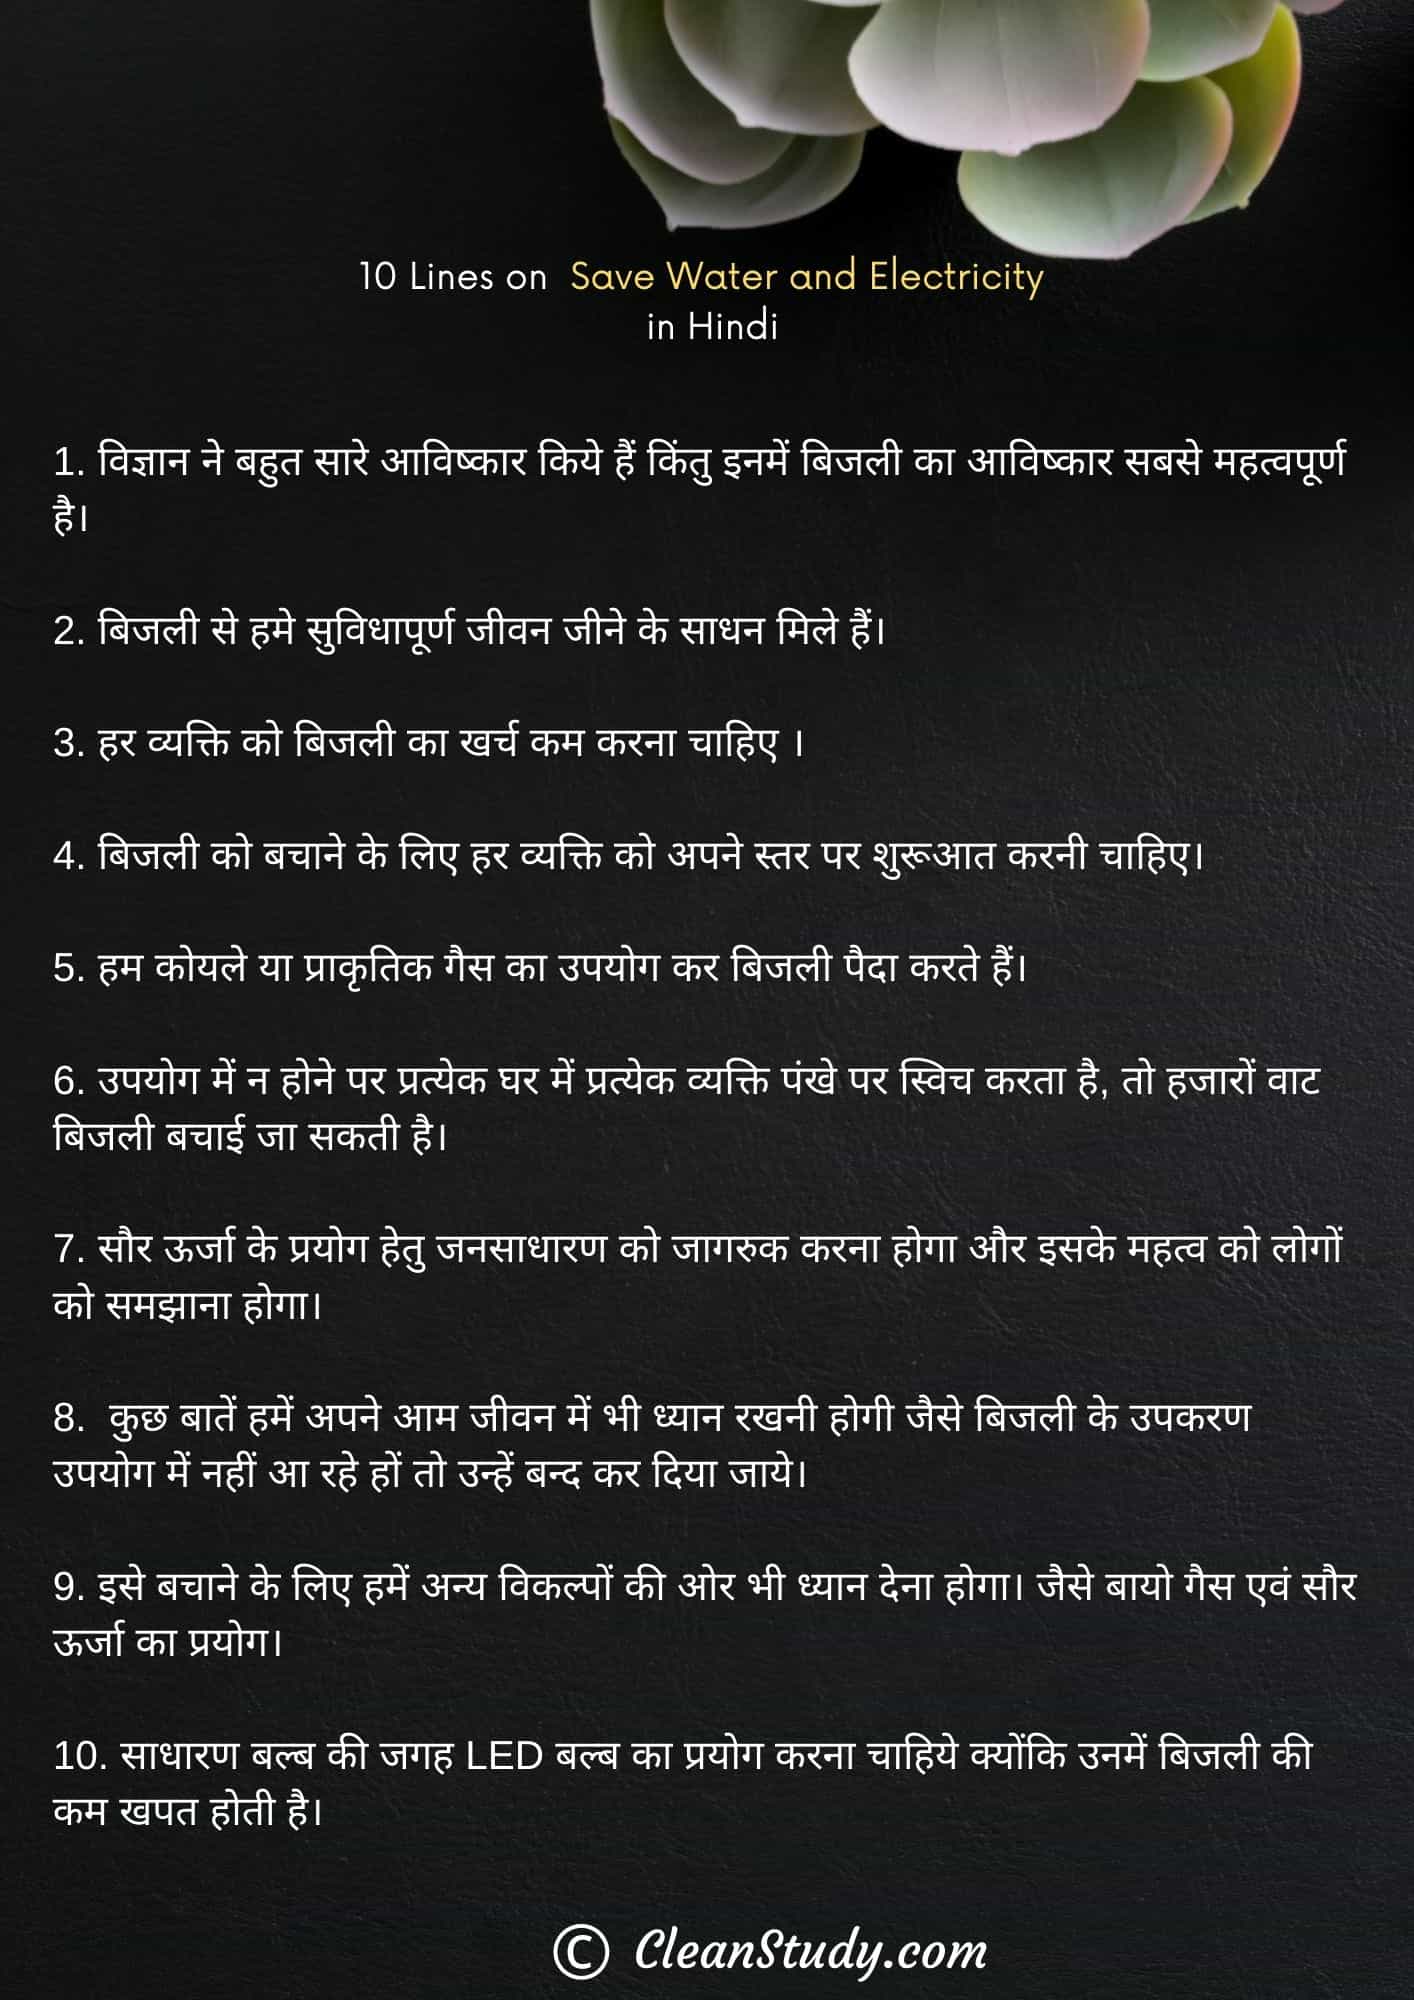 10 Lines on Save Water and Electricity in Hindi